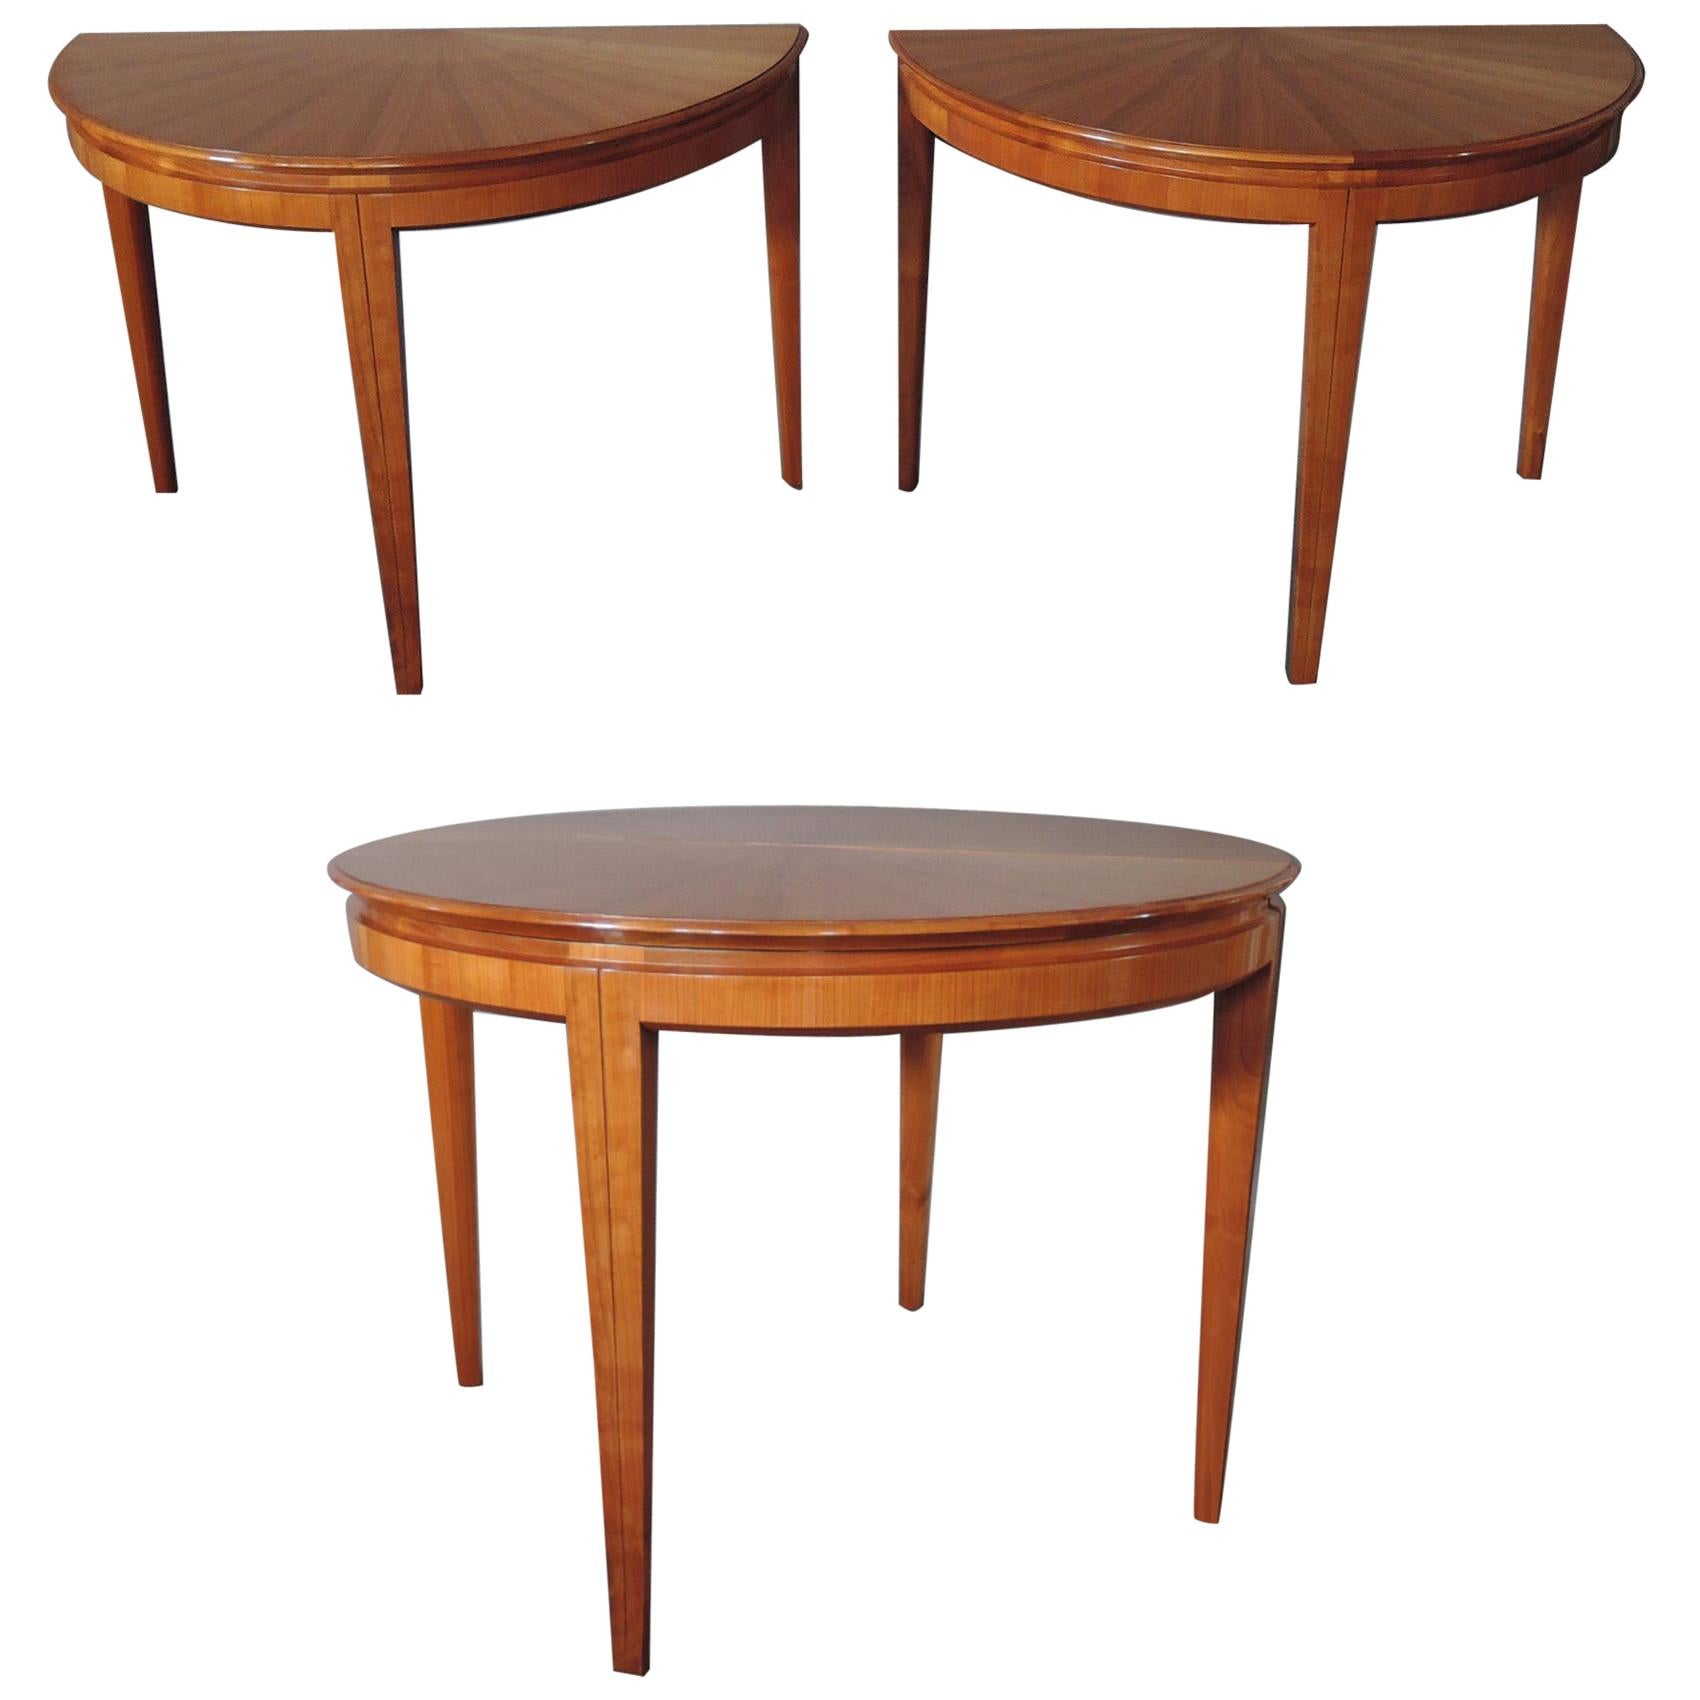 French 1950s Cherry Round Dining Table Divisible in 2 Demilune Tables